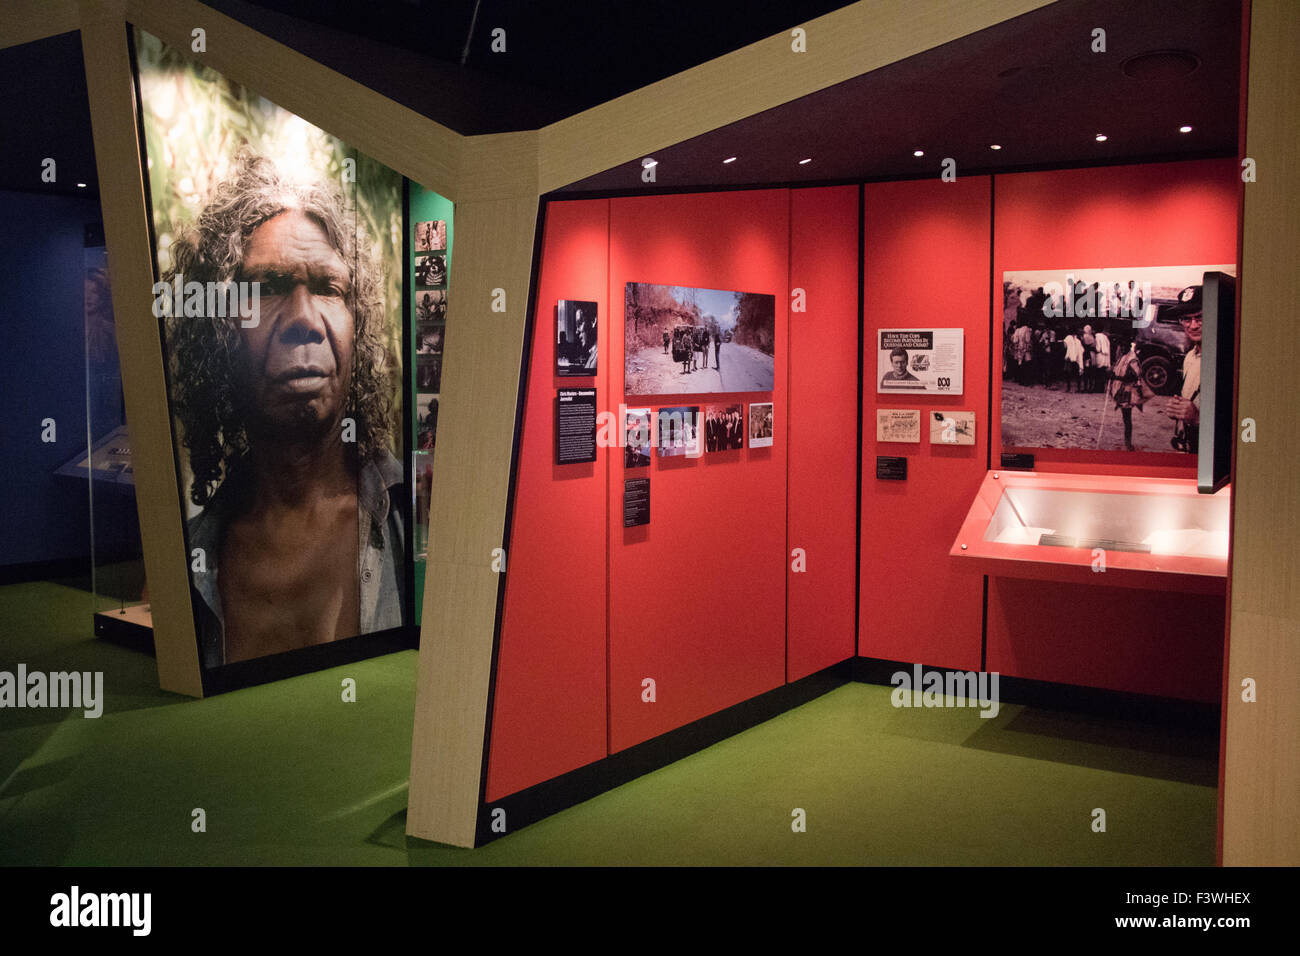 Exhibits inside the Australian Centre for the Moving Image (ACMI) at Federation Square, Melbourne. Stock Photo